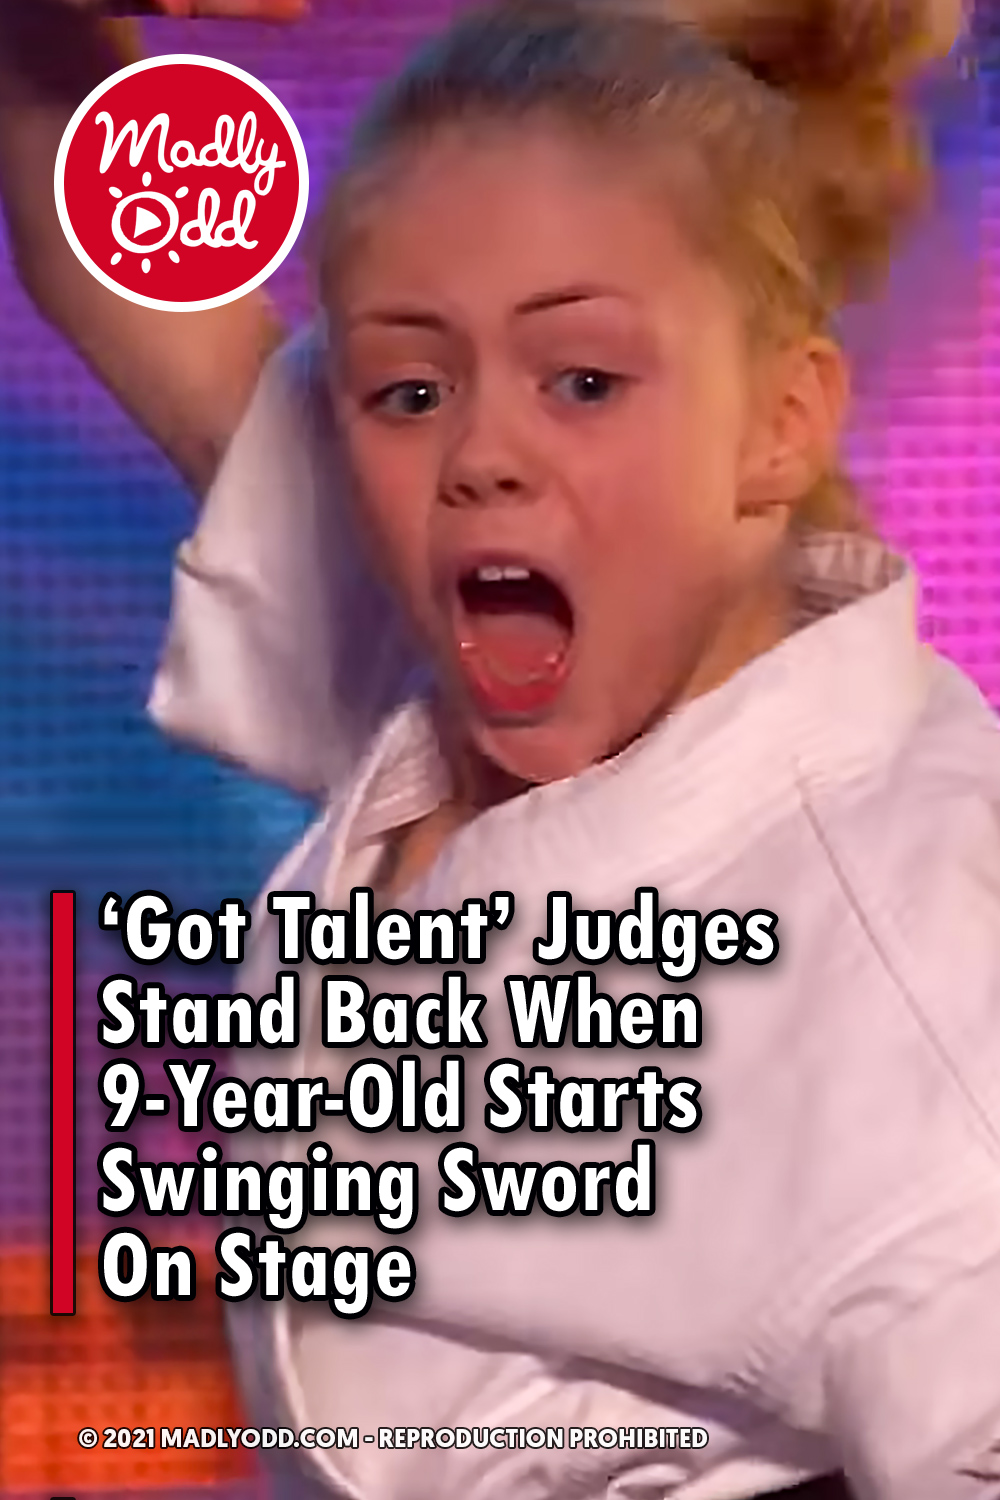 ‘Got Talent’ Judges Stand Back When 9-Year-Old Starts Swinging Sword On Stage